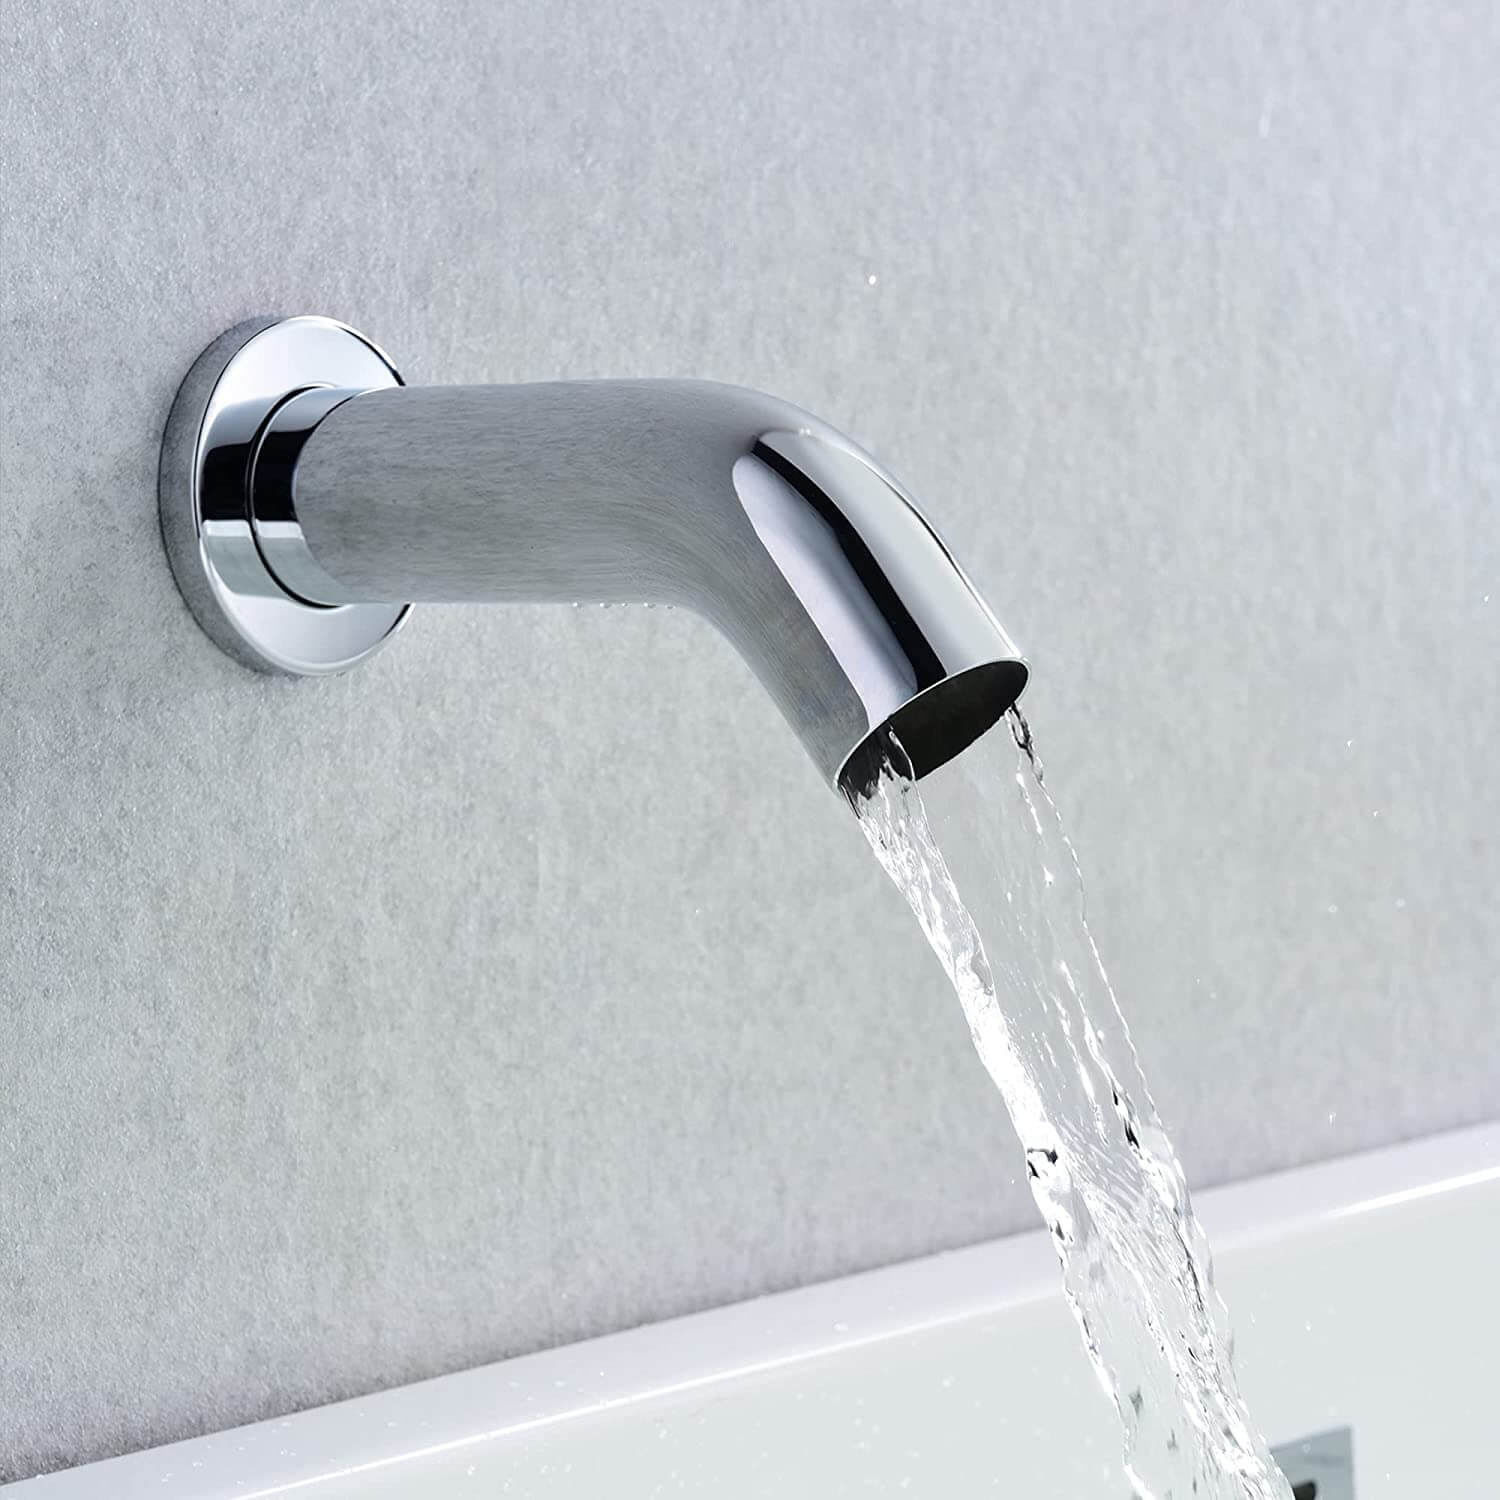 wowow chrome waterfall tub faucet with handheld shower (1)